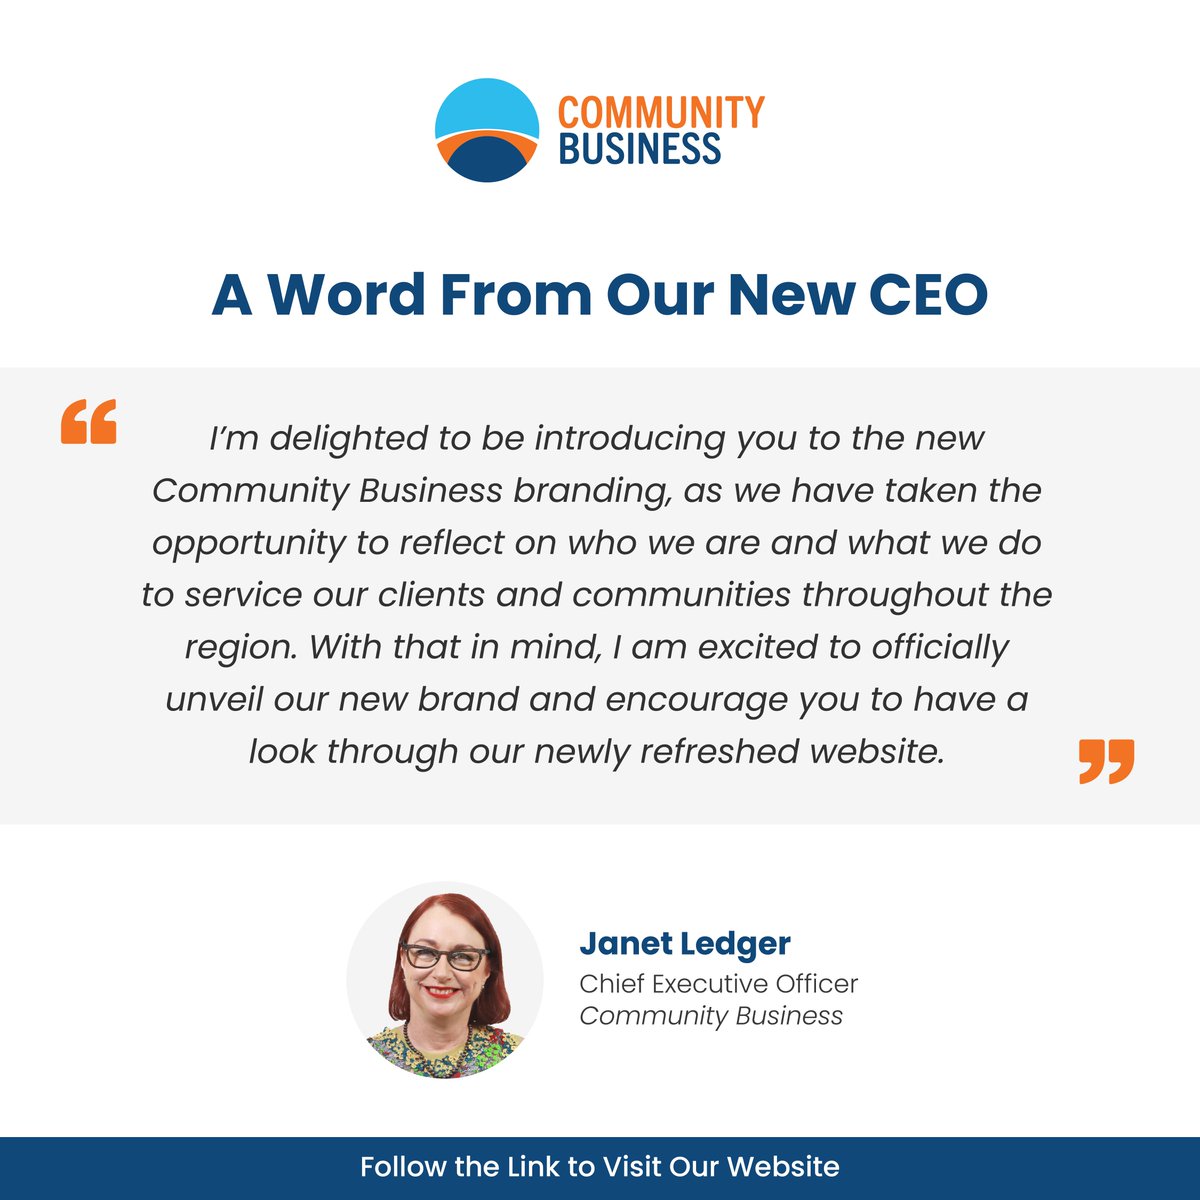 📣A Word From Our CEO 👉Visit Our Refreshed Website: communitybusiness.org ------------ 📣A word from our new CEO about our new refreshed website and the launch of our new brand Visit our website to see what's new in our brand refresh!